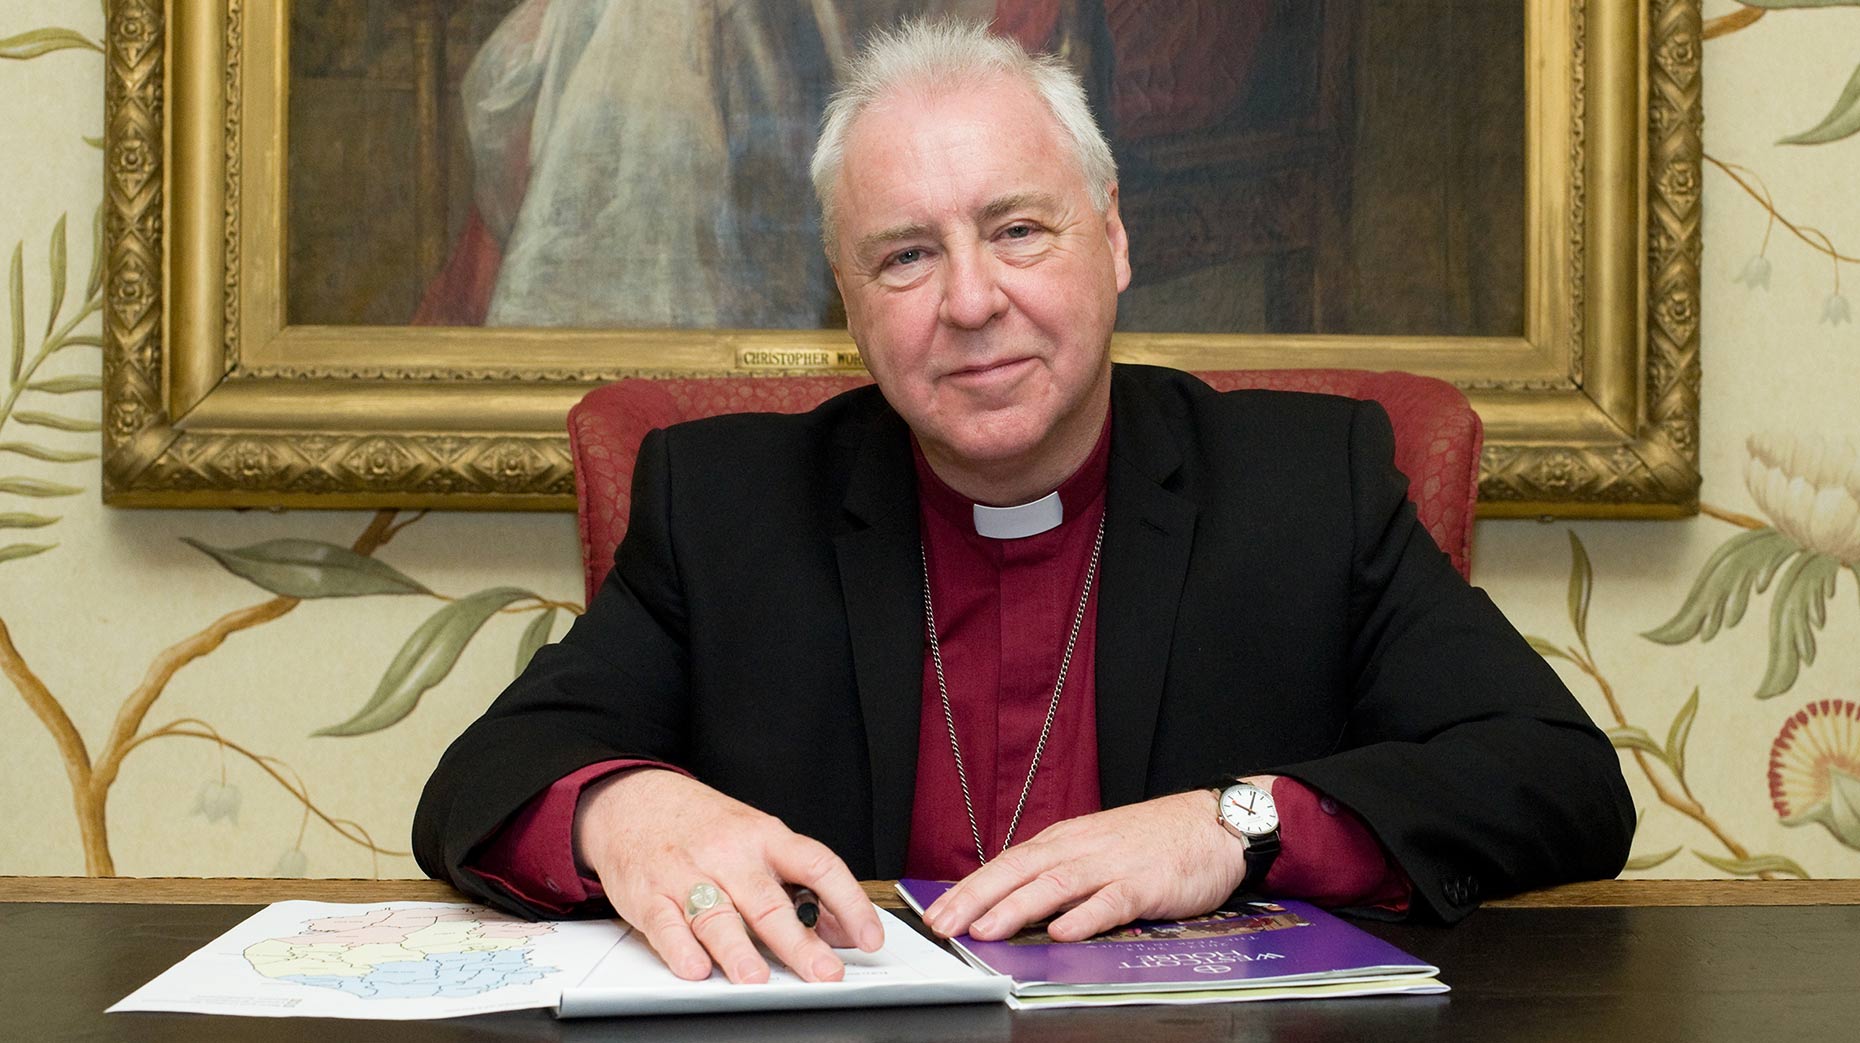 Christopher Lowson, Bishop of Lincoln